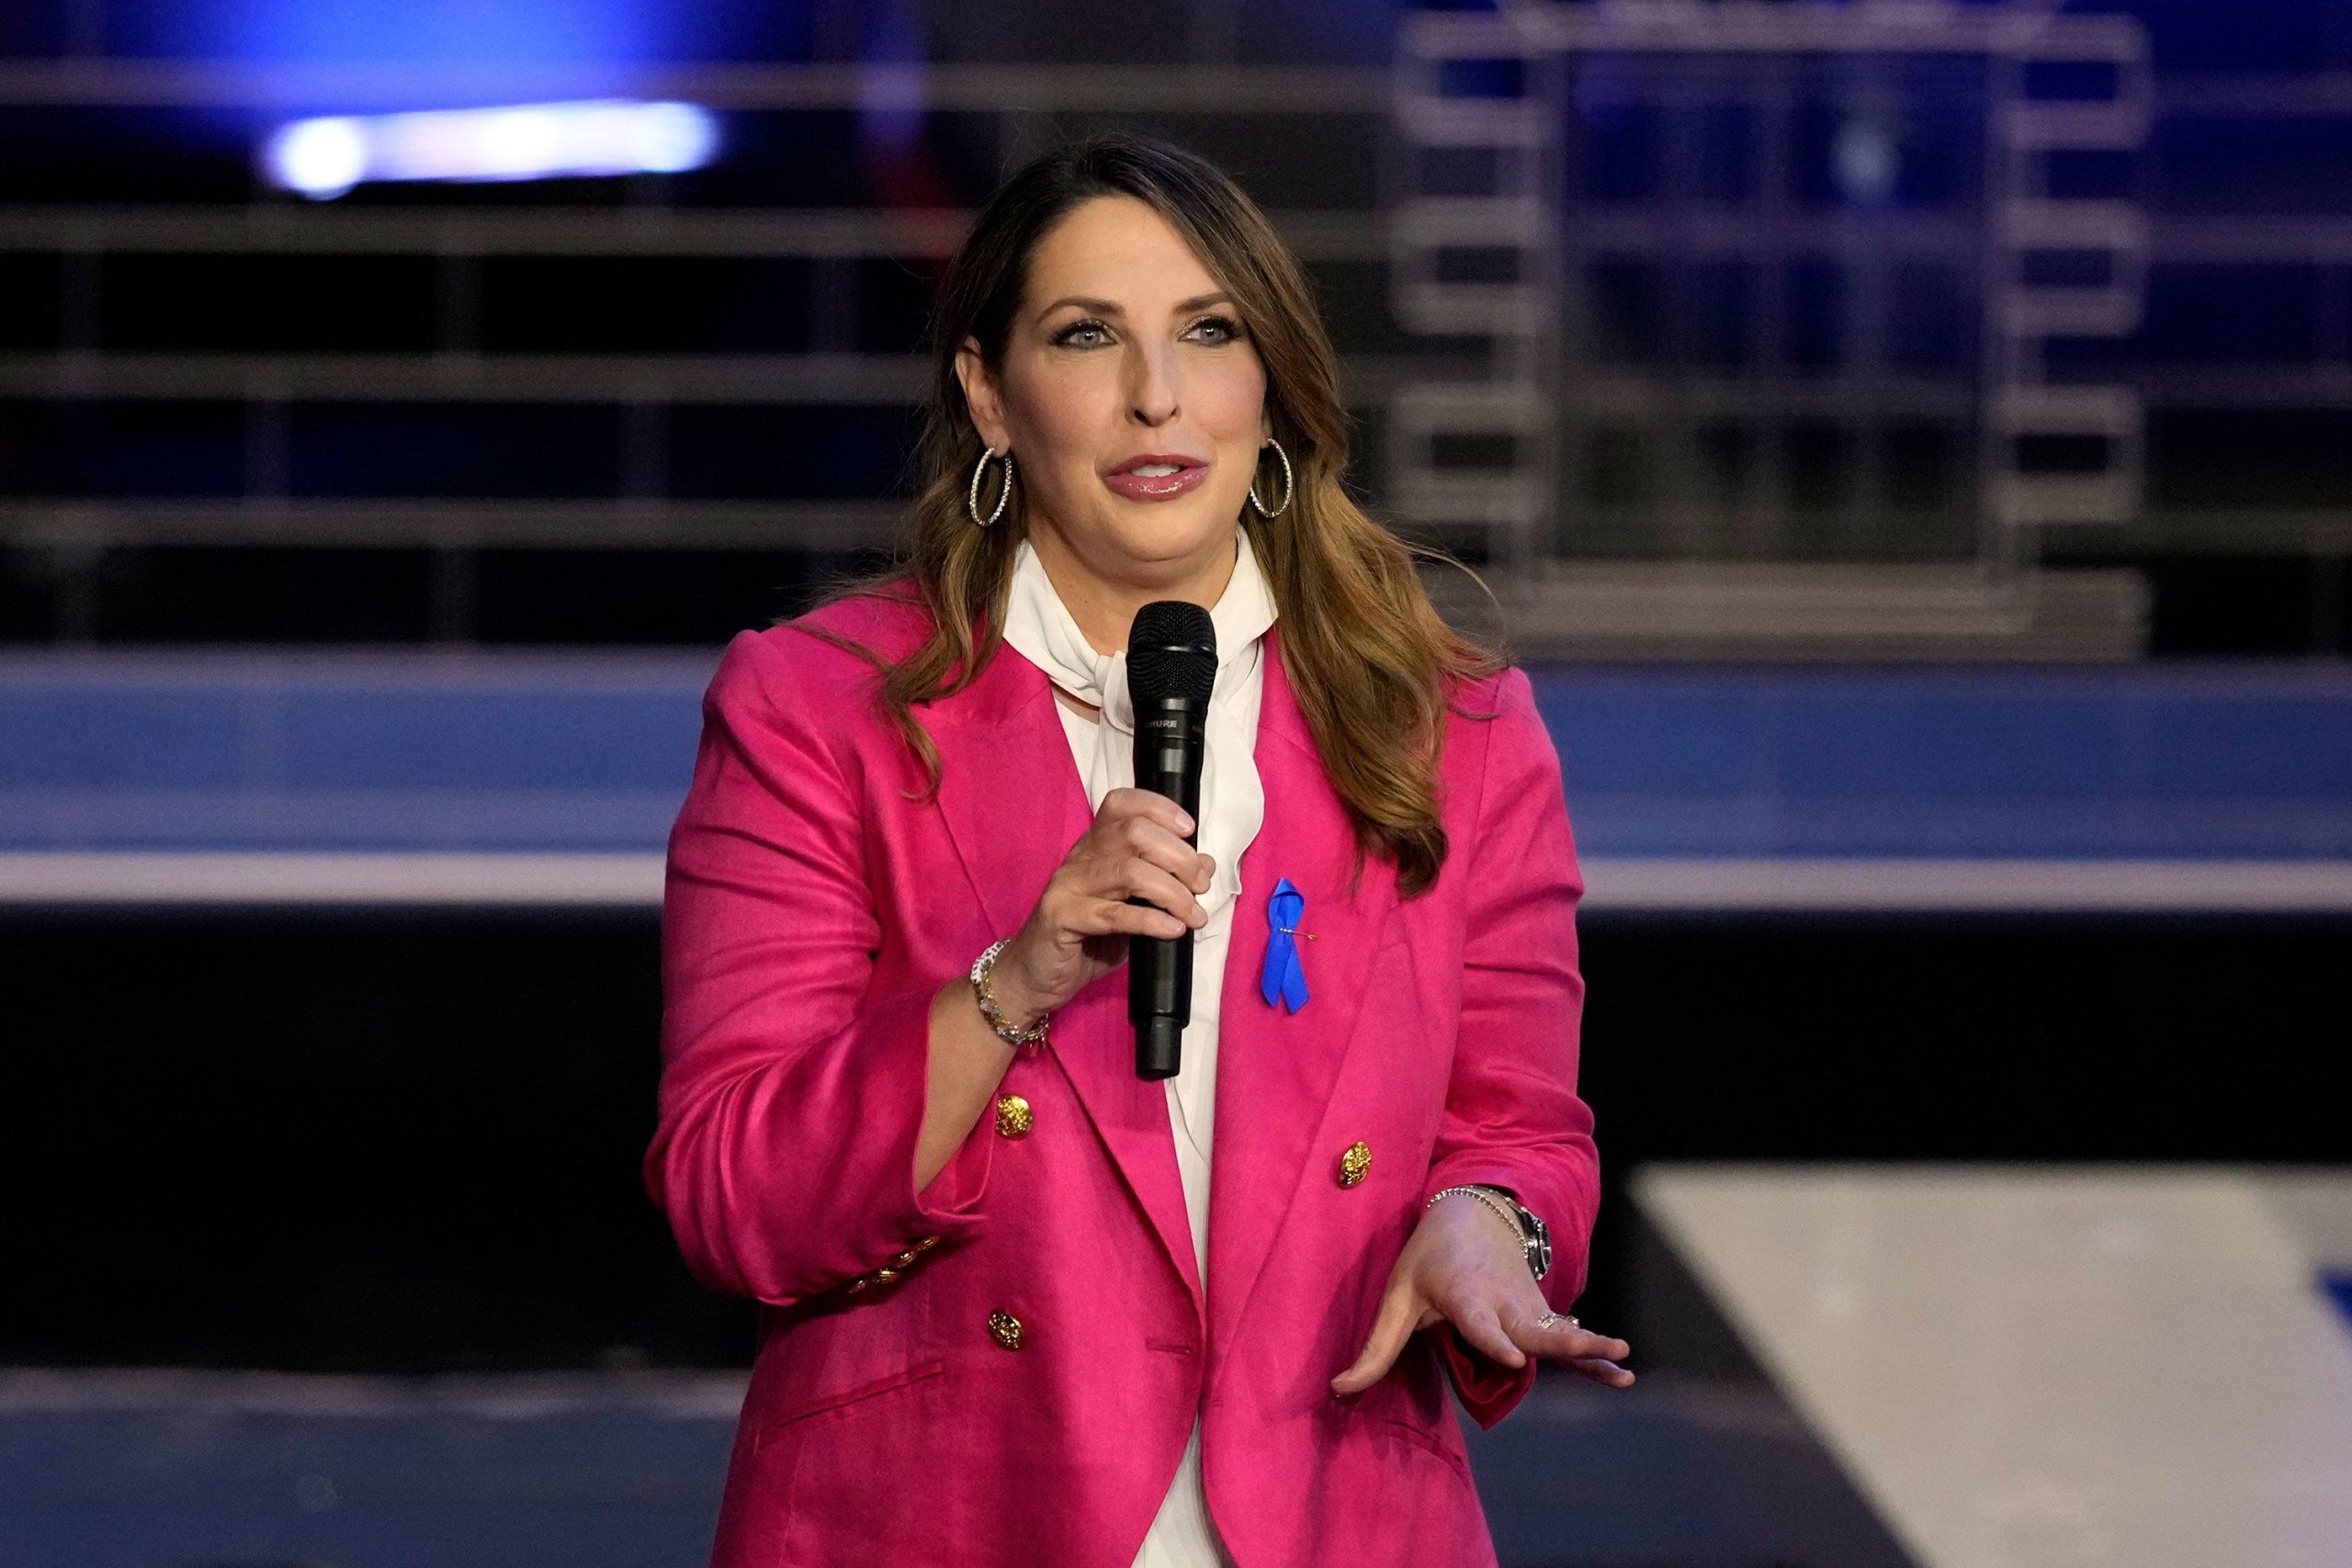 Trump hints at potential changes in the RNC when questioned about Ronna McDaniel